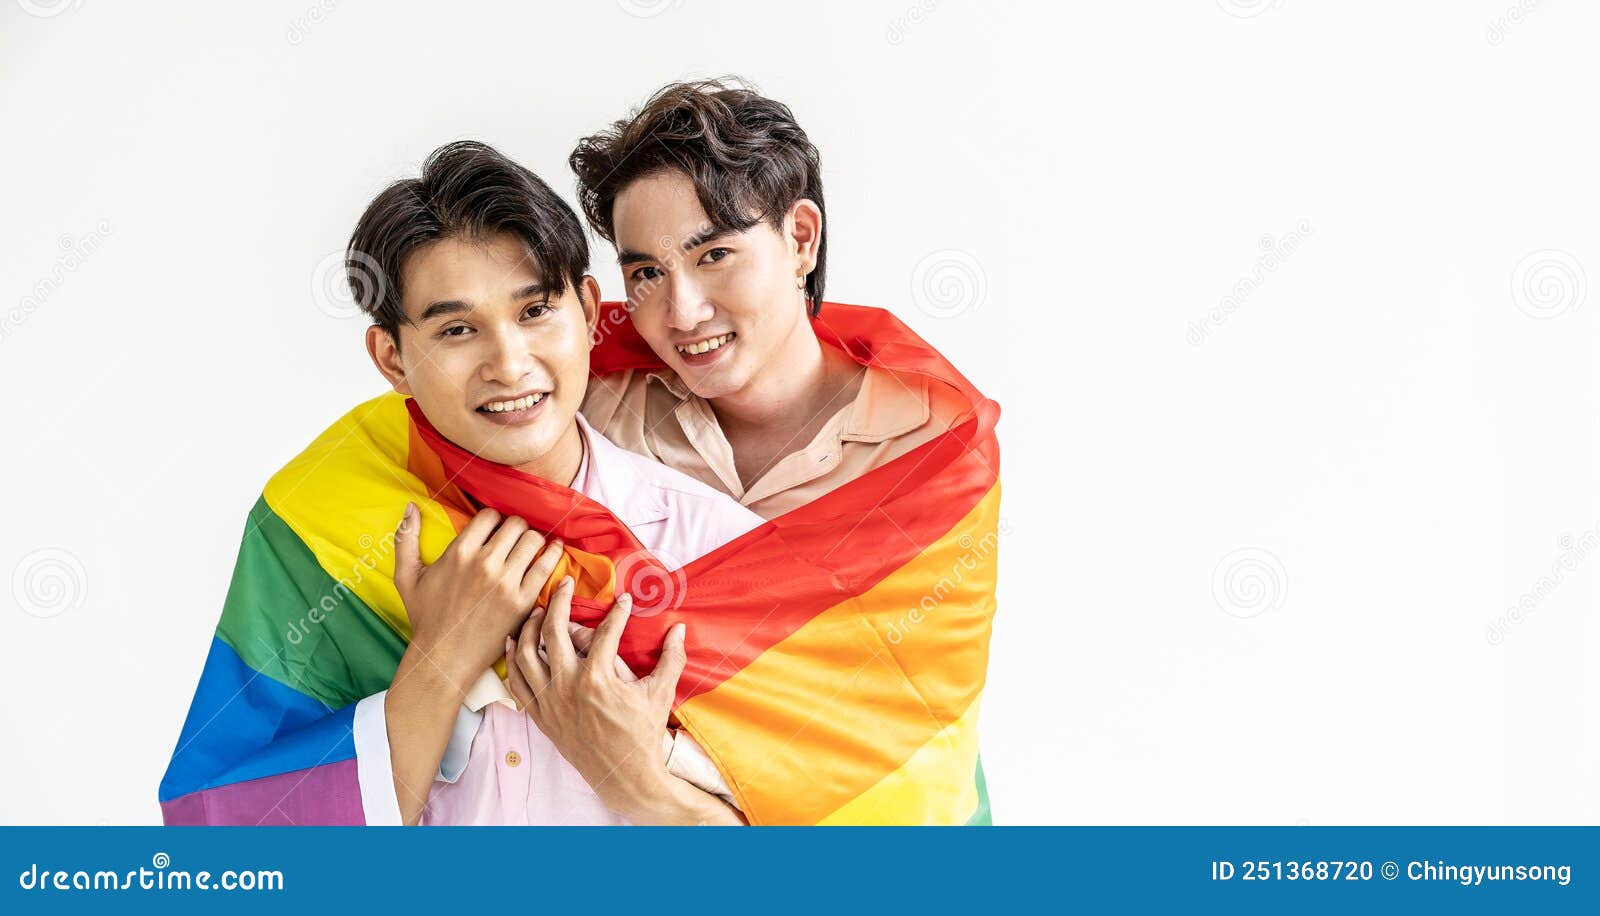 Guys Spend Time Together At Home Portrait Of Happy Asian Gay Couple Embracing And Showing Their